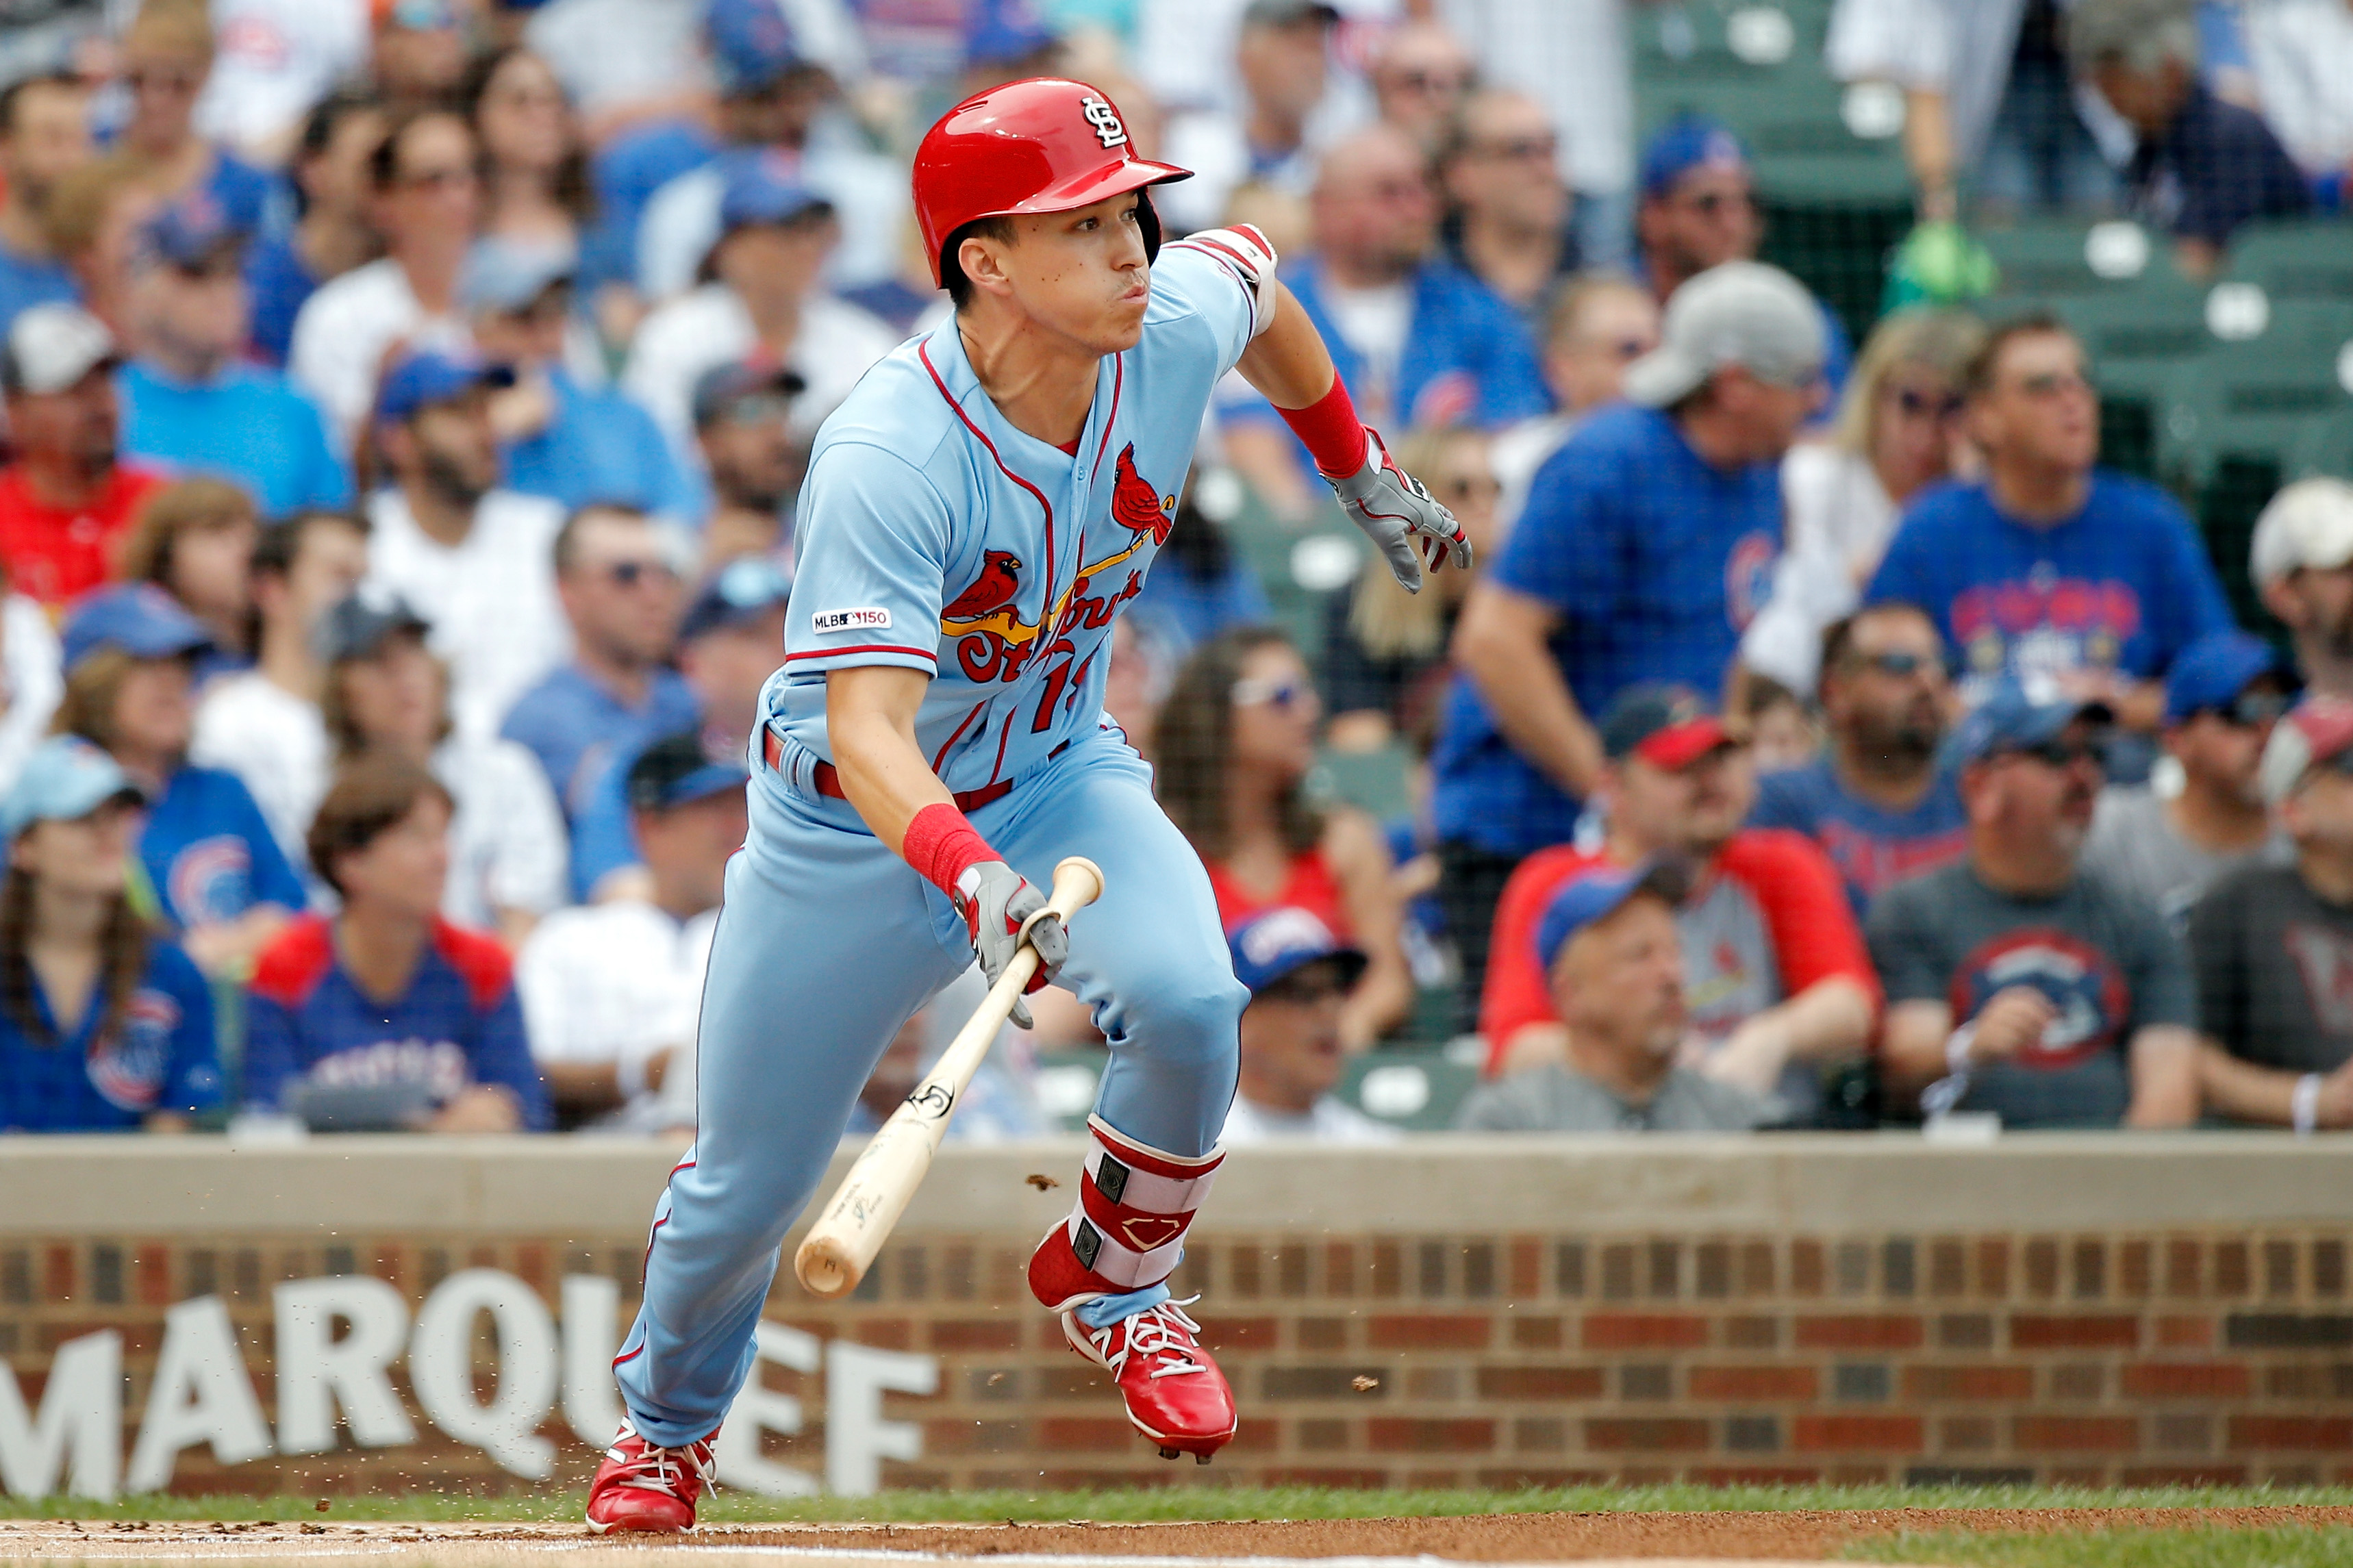 St. Louis Cardinals tie MLB playoff record for most runs in one inning | The Sports Daily